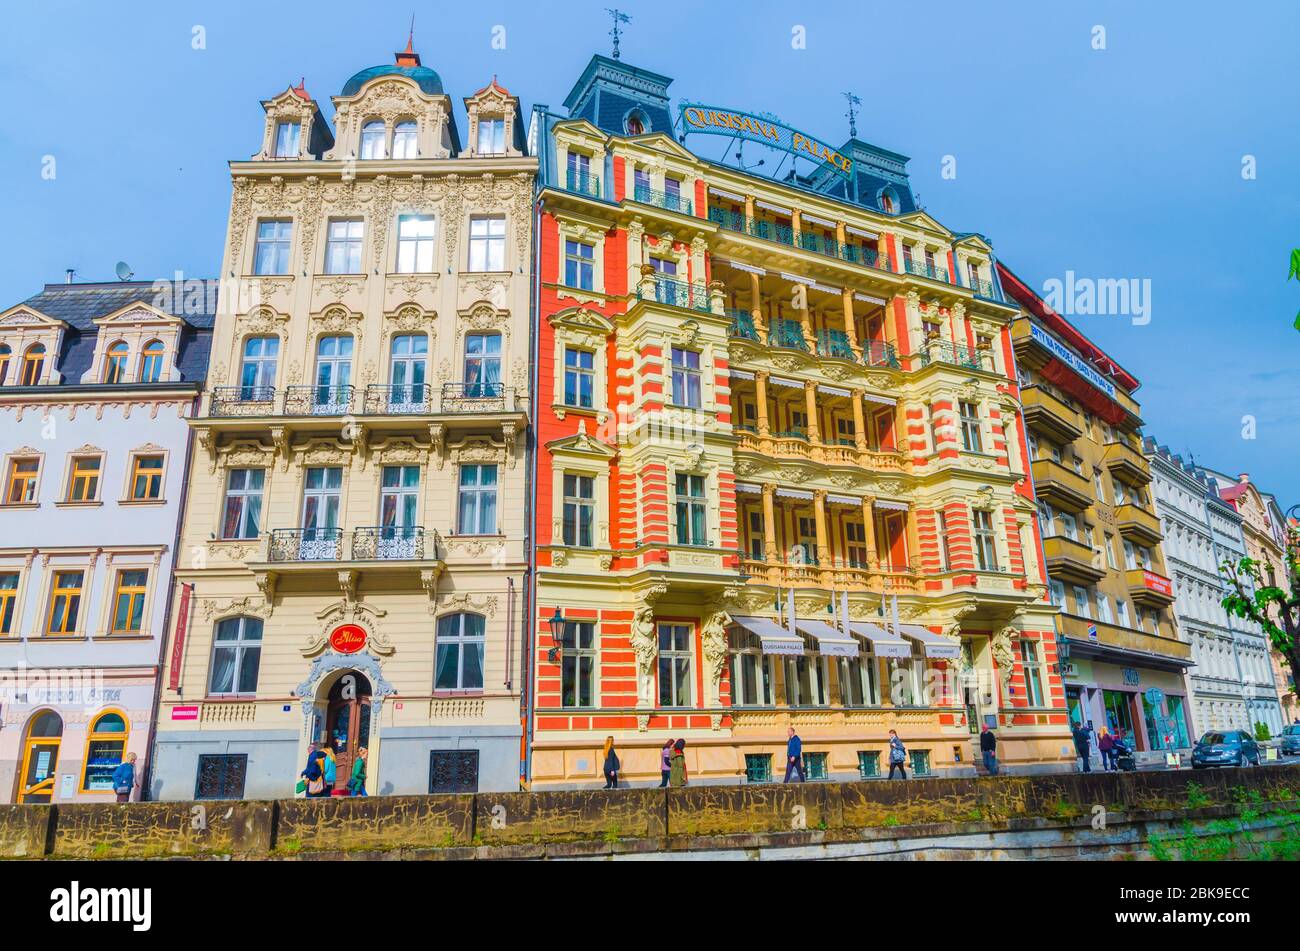 Karlovy Vary, Czech Republic, May 11, 2019: Quisisana Palace hotel building and Tepla river embankment in Carlsbad historical city centre, blue sky background, West Bohemia Stock Photo